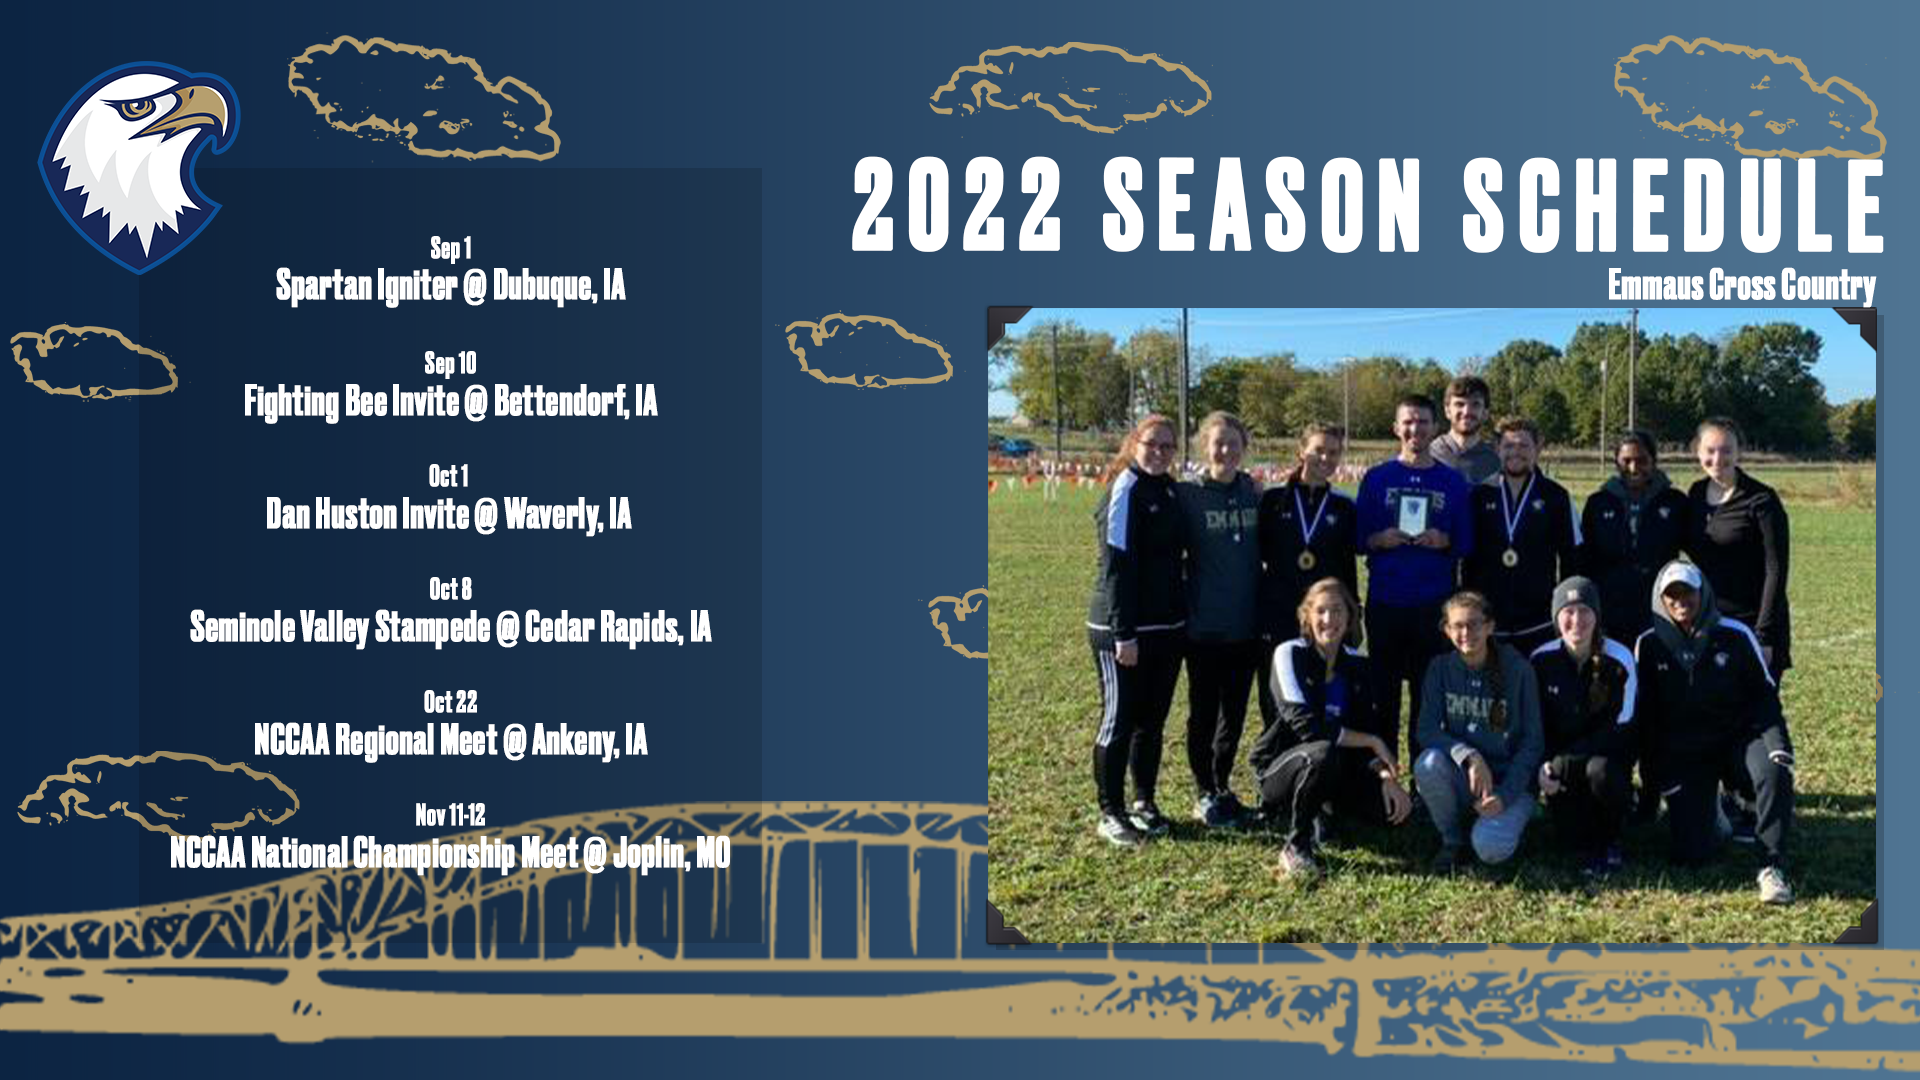 Cross Country Schedule Announced for 2022 Season